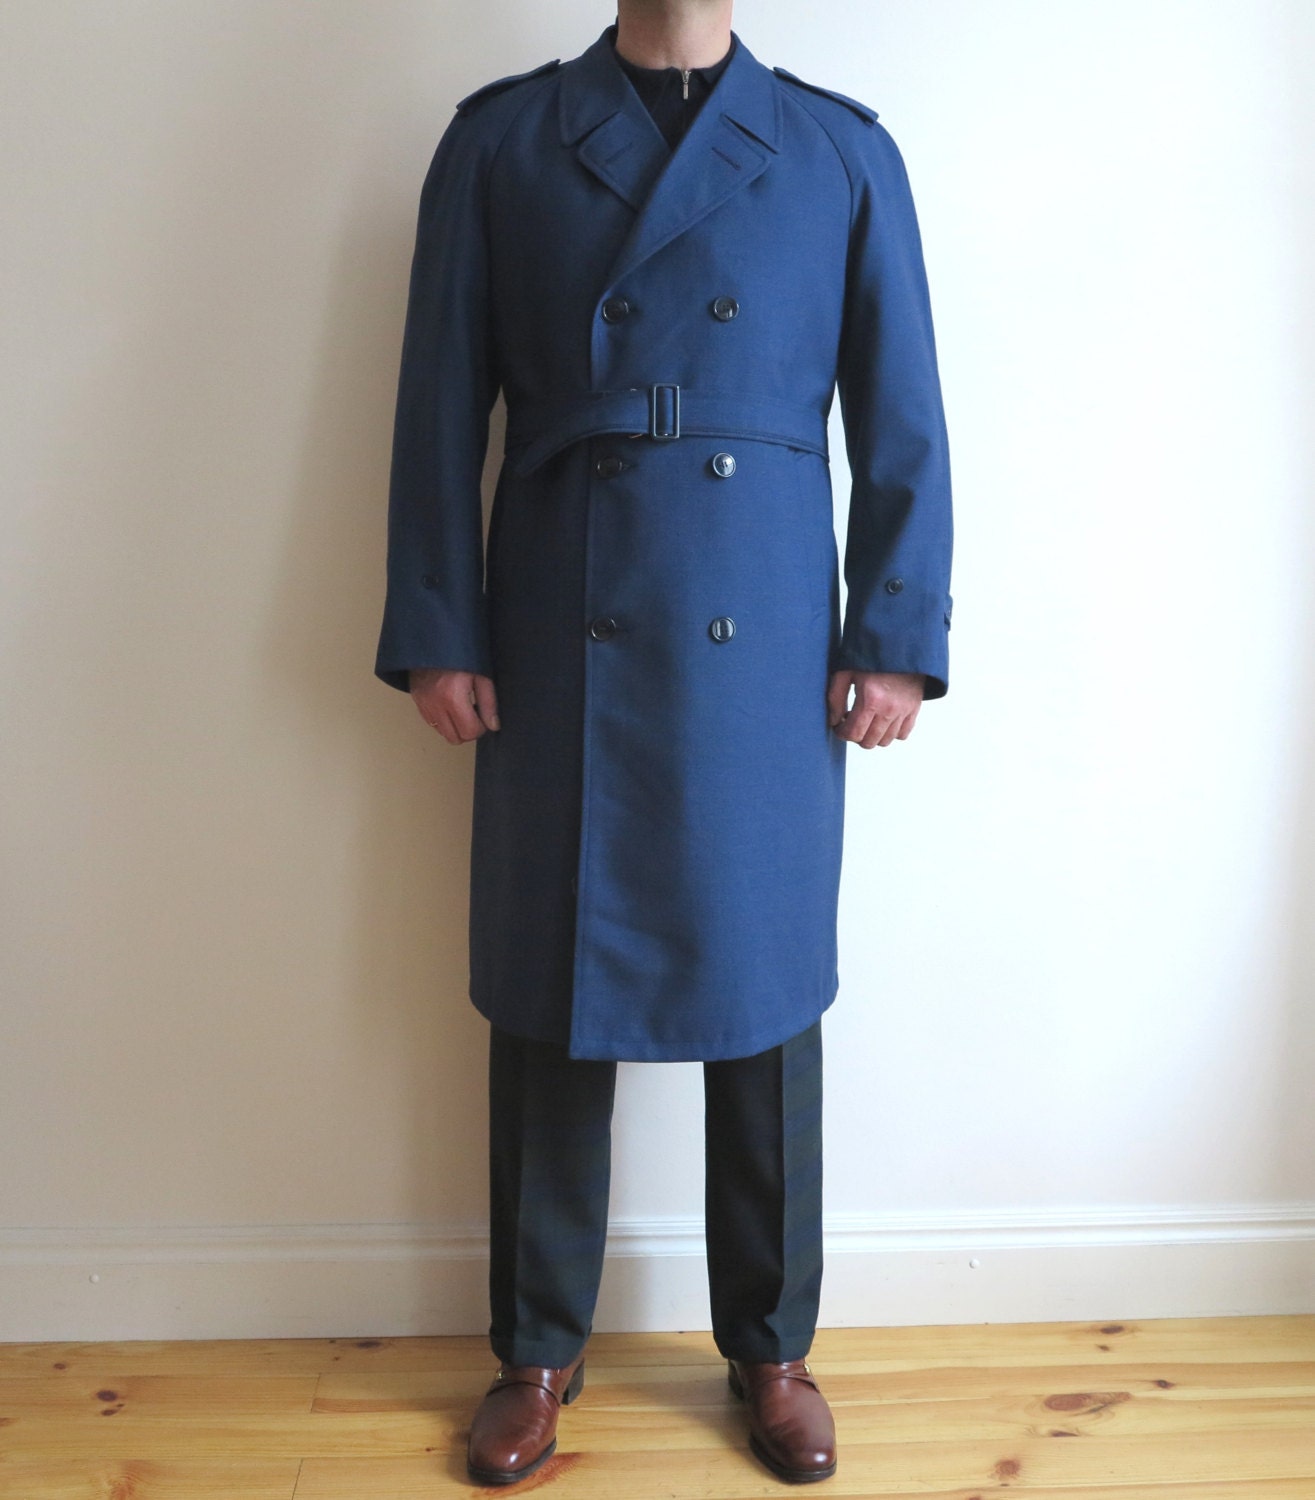 Mens Dark Blue Navy Trench Coat Military Style by VintageOffer